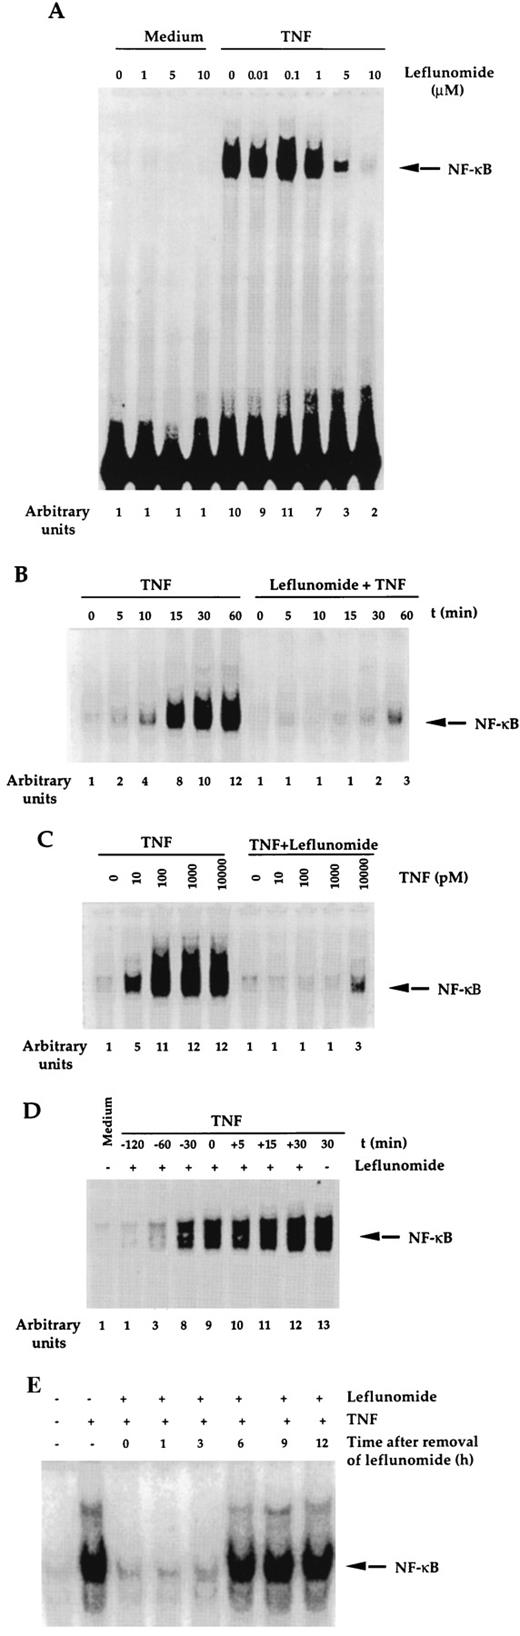 FIGURE 2. A, Dose response of leflunomide for the inhibition of TNF-dependent NF-κB activation. Jurkat cells (2 × 106/ml) were preincubated at 37°C for 2 h with different concentrations (0–10 μM) of leflunomide followed by 30-min incubation with 0.1 nM TNF. After these treatments, nuclear extracts were prepared and then assayed for NF-κB as described in Materials and Methods. Arbitrary units at the bottom correspond to quantitation of NF-κB bands. B, Effect of leflunomide on the kinetics of activation of NF-κB by TNF. Jurkat cells (2 × 106/ml) were incubated at 37°C with 10 μM leflunomide for 2 h, treated with 0.1 nM TNF at 37°C for the times indicated, and then tested for NF-κB activation by EMSA. C, Effect of leflunomide on activation of NF-κB induced by different concentrations of TNF. Jurkat cells (2 × 106/ml) were incubated at 37°C with 10 μM leflunomide for 2 h and then tested for NF-κB activation at 37°C for 30 min with the concentrations of TNF indicated. After these treatments nuclear extracts were prepared and then assayed for NF-κB. D, Time course of inhibition of TNF-dependent NF-κB by leflunomide. Jurkat cells (2 × 106/ml) were preincubated at 37°C with 10 μM leflunomide for the indicated times and then tested for NF-κB activation at 37°C for 30 min either with or without 0.1 nM TNF. −, the time leflunomide was present before the addition of TNF; 0, coincubation with TNF; +, the time leflunomide was added after TNF. After these treatments nuclear extracts were prepared and assayed for NF-κB. E, Reversal of the inhibitory effect of leflunomide on TNF-dependent NF-κB activation. Jurkat cells (2 × 106/ml) were preincubated at 37°C with 10 μM leflunomide; after 2 h leflunomide was washed off, and cells were cultured in drug-free medium for the indicated times and then tested for NF-κB activation after treatment with 0.1 nM TNF at 37°C for 30 min. After these treatments nuclear extracts were prepared and assayed for NF-κB.